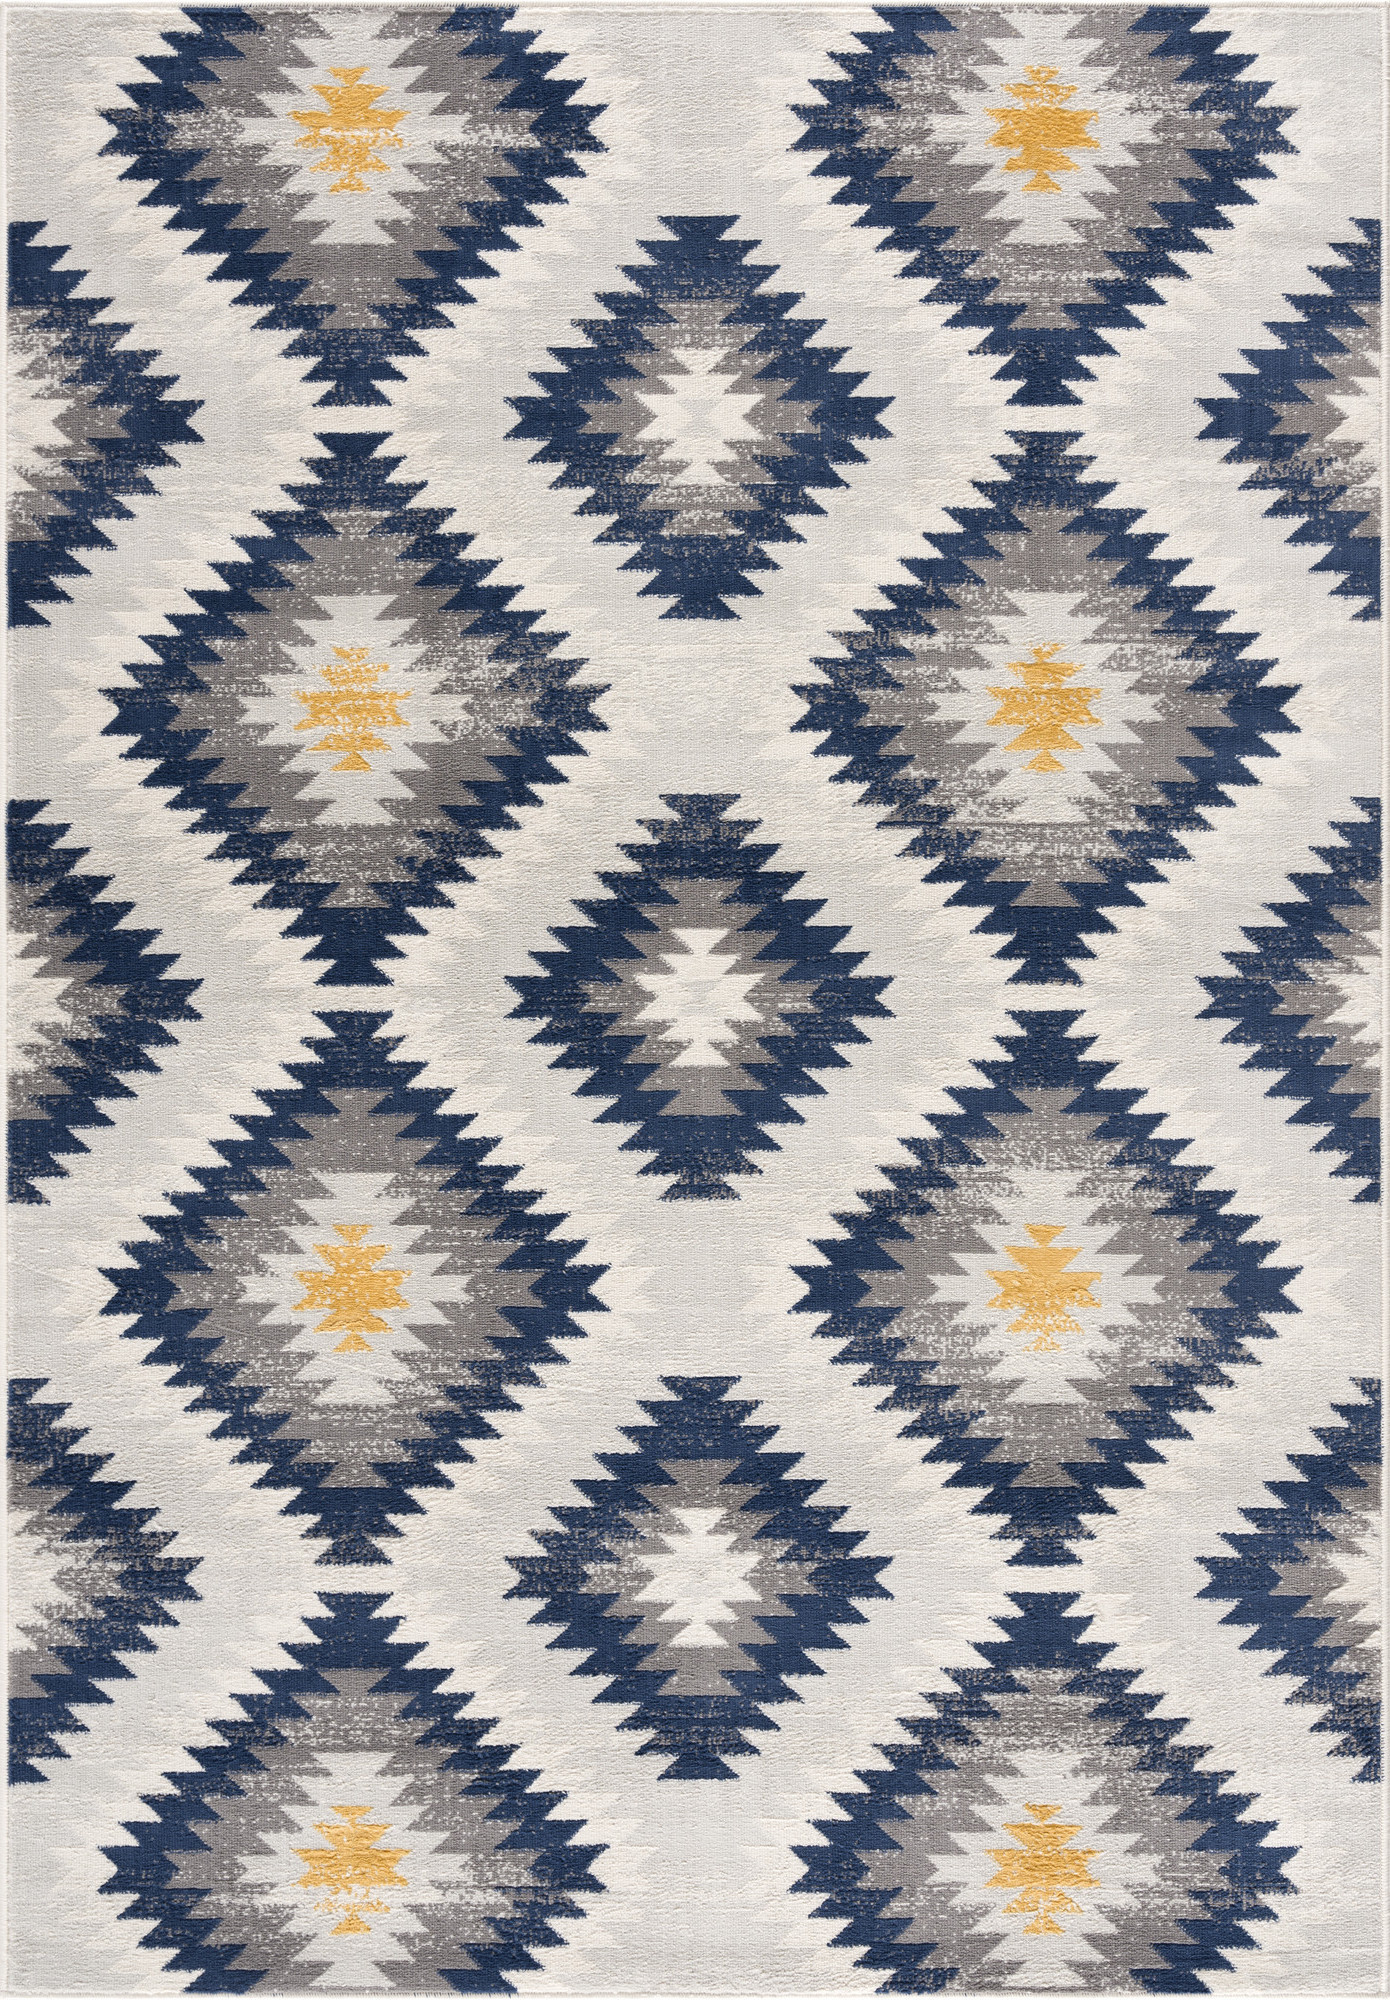 7 x 10 Blue and Gray Kilim Pattern Area Rug